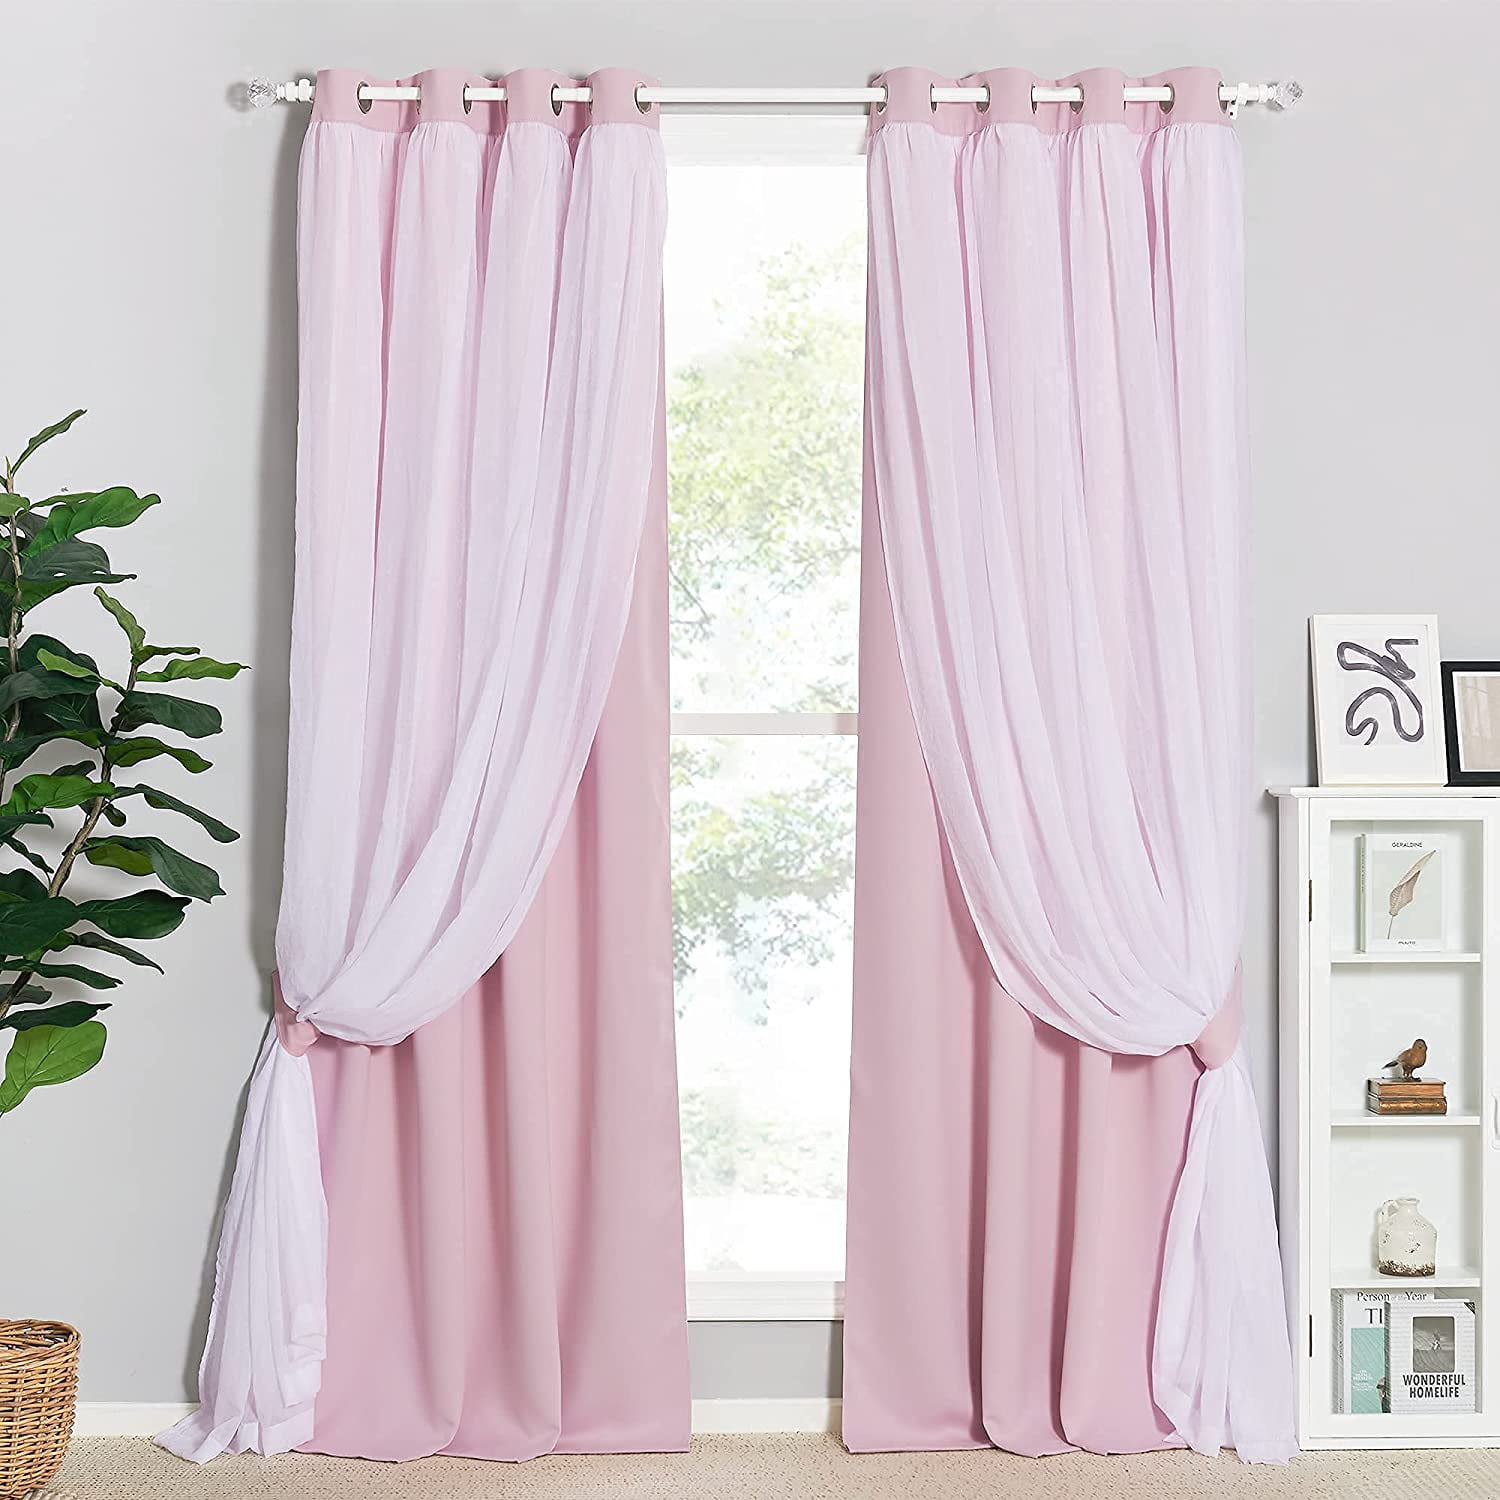 Pink Curtains for Bedroom Nursery Layered Curtains Sheer Blackout Draperies  with Tie Backs Windows Covering 52 x 84 inches Light Pink 2 Panels -  Walmart.com